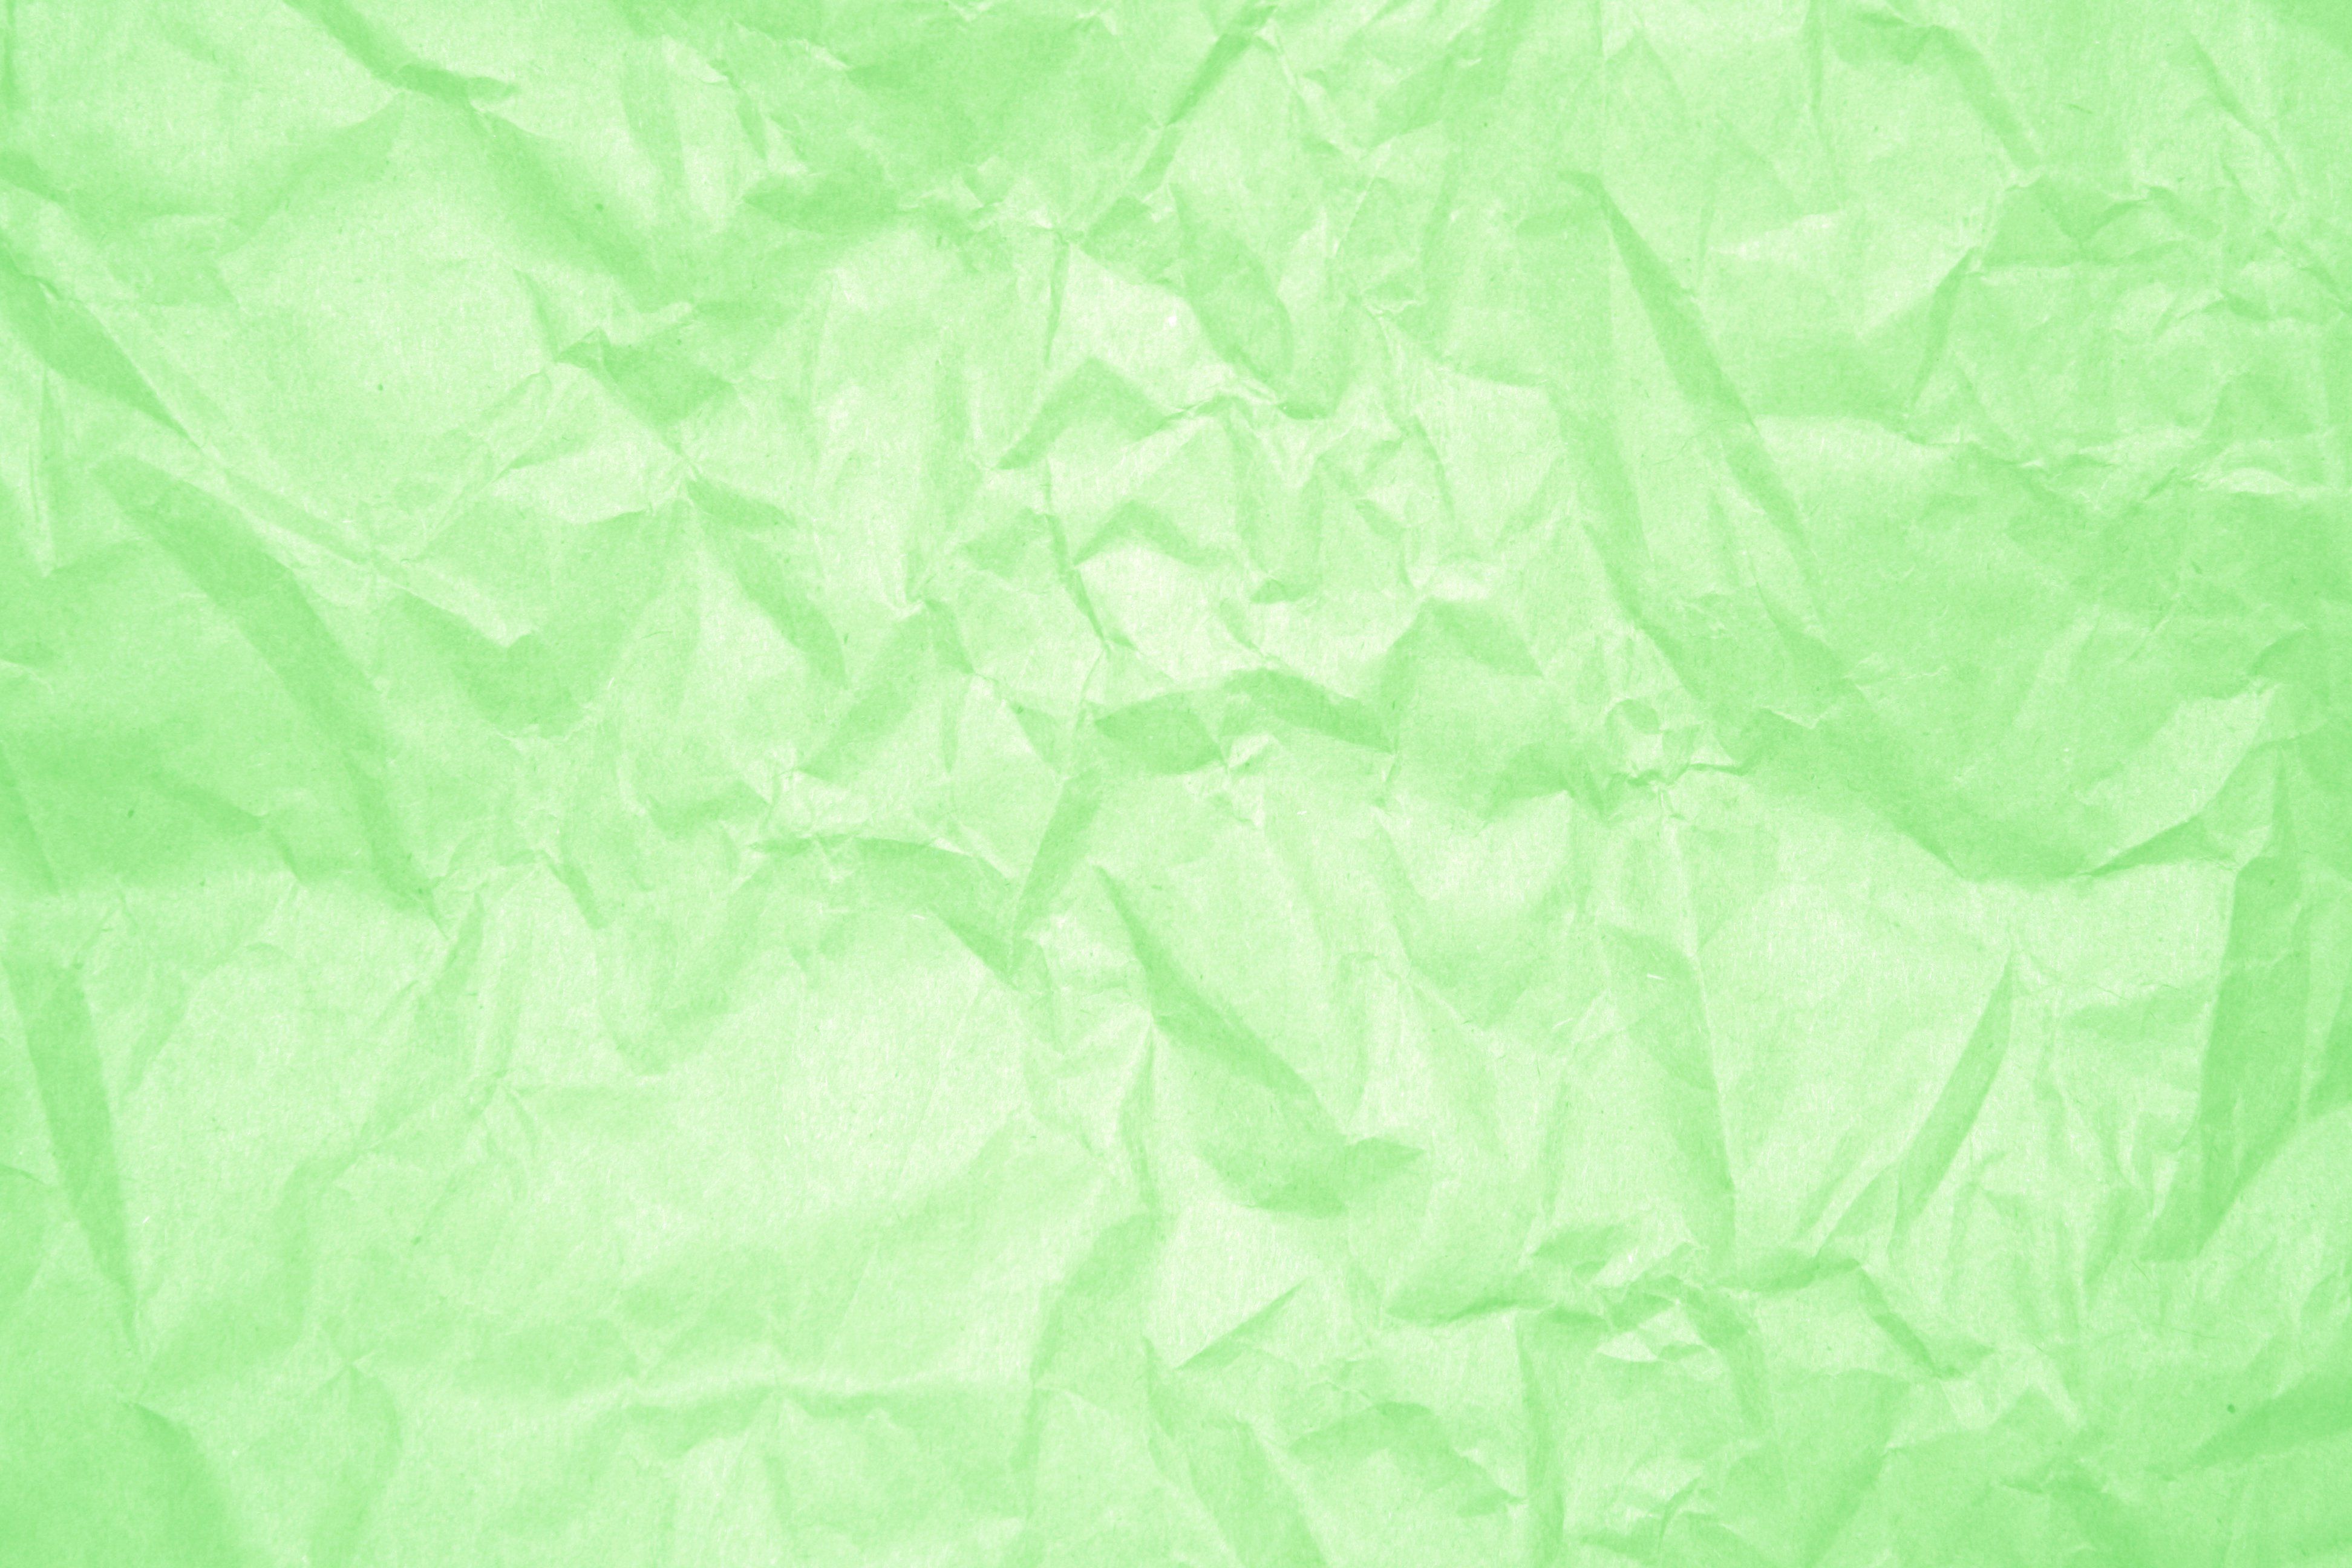 3888x2592 Crumpled Light Green Paper Texture Picture Free Photograph Photo Public Domain